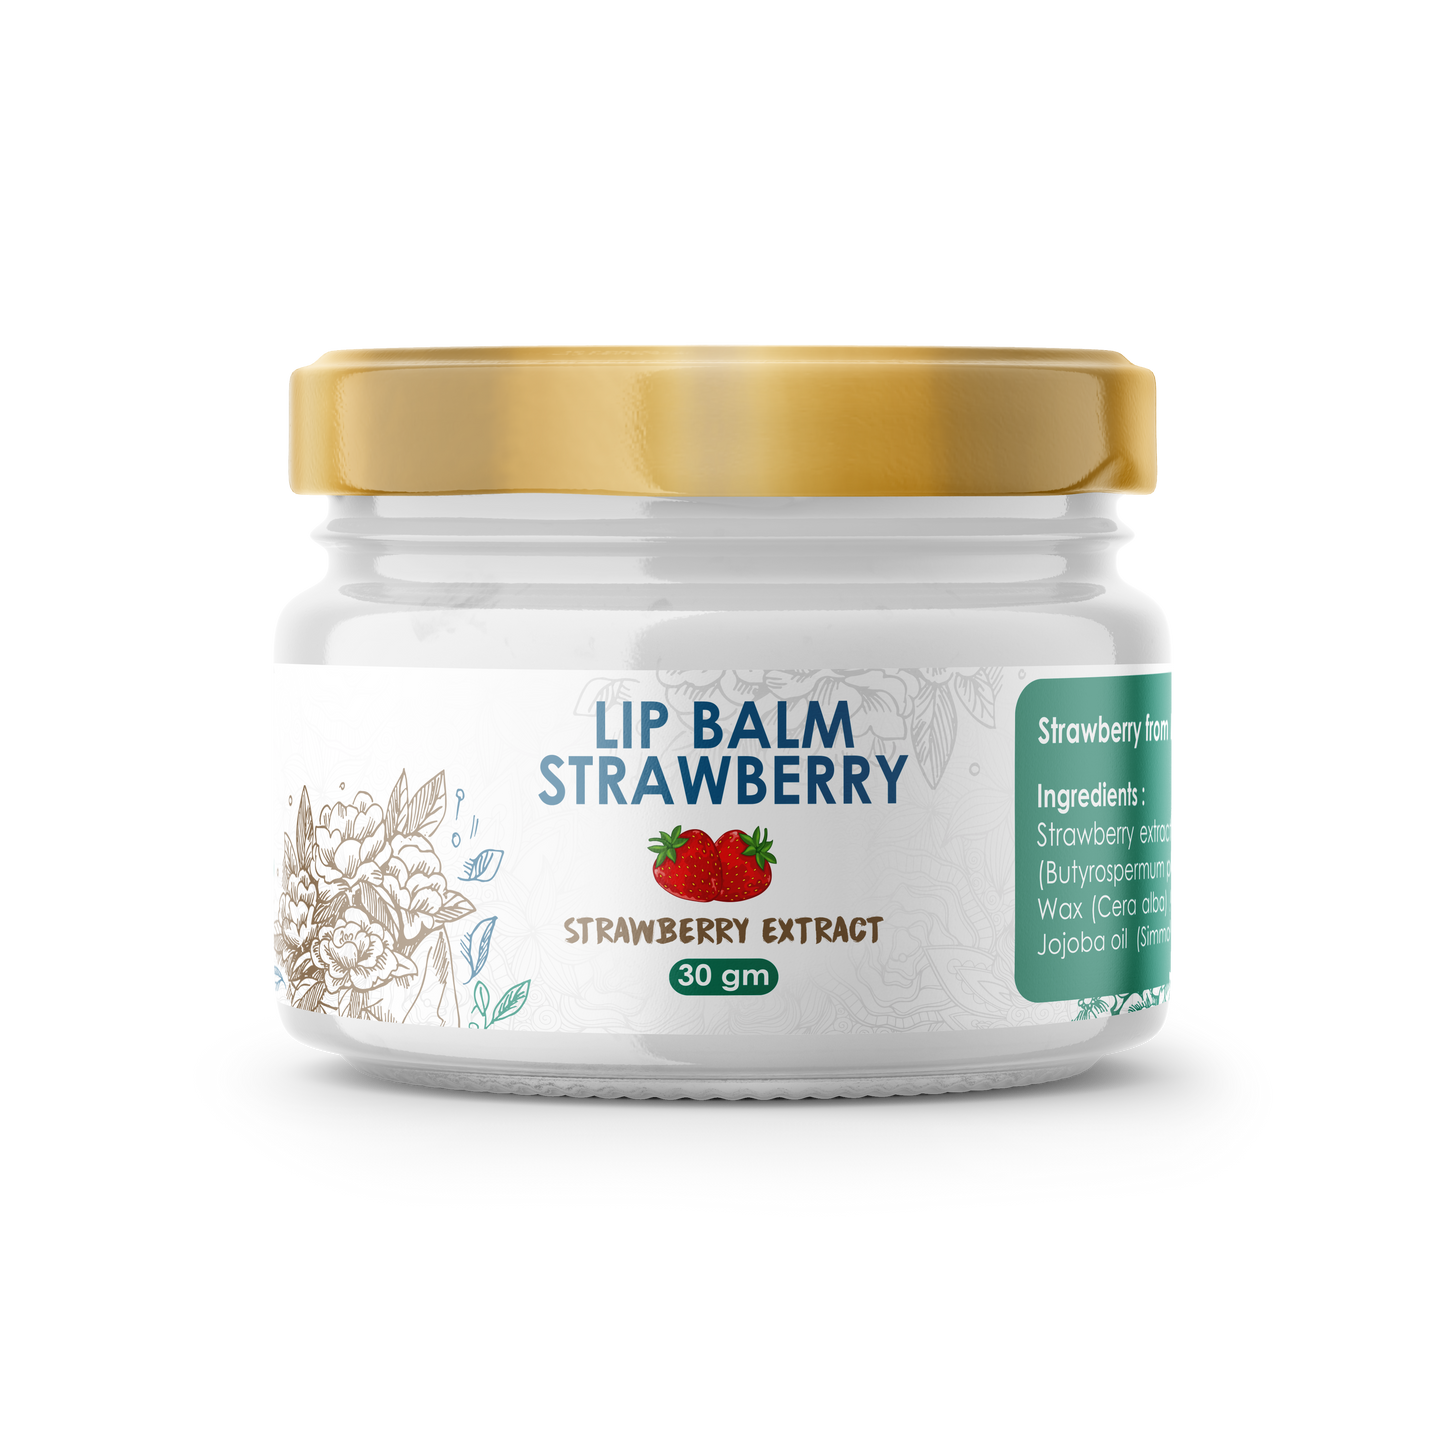 Infinity Naturals Lip Balm Strawberry Extract